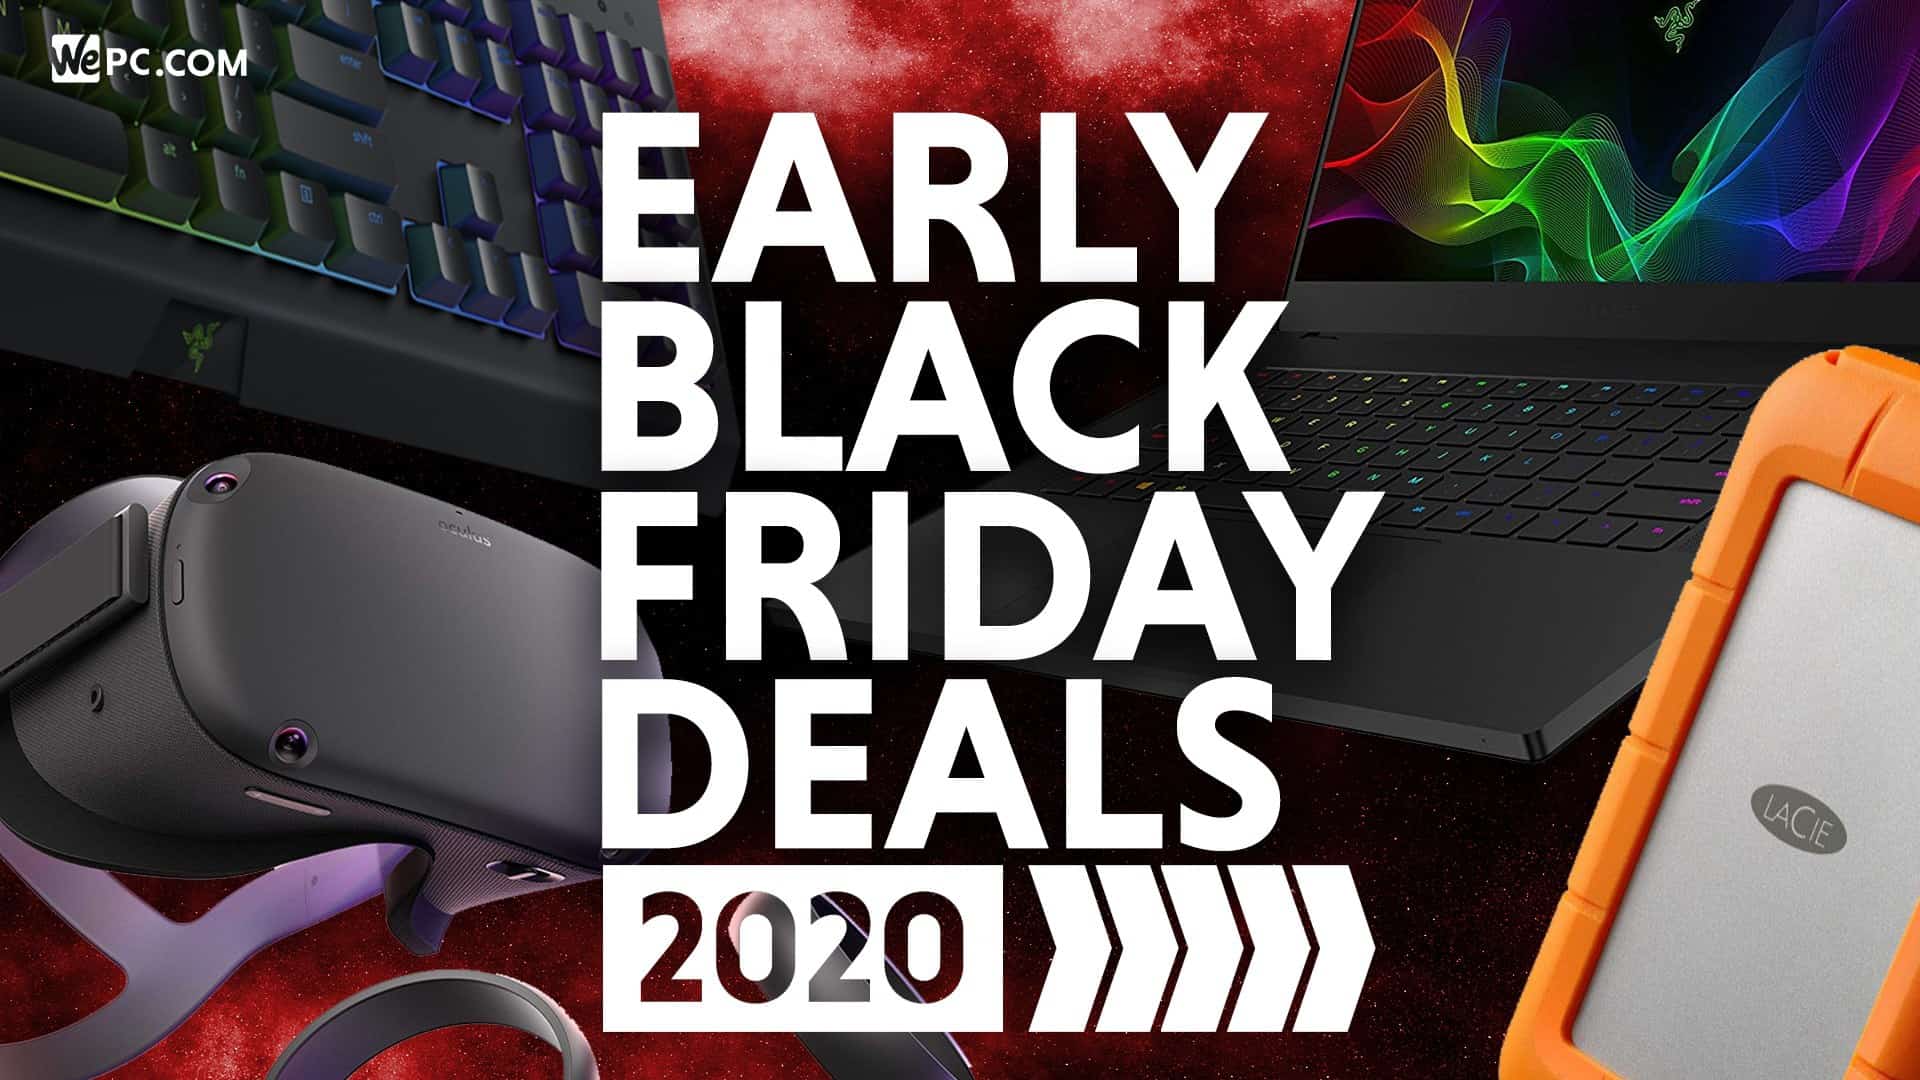 Early Black Friday Deals Are Already Going Live - See What's Already On - Who Started Black Friday Deals On Thursday